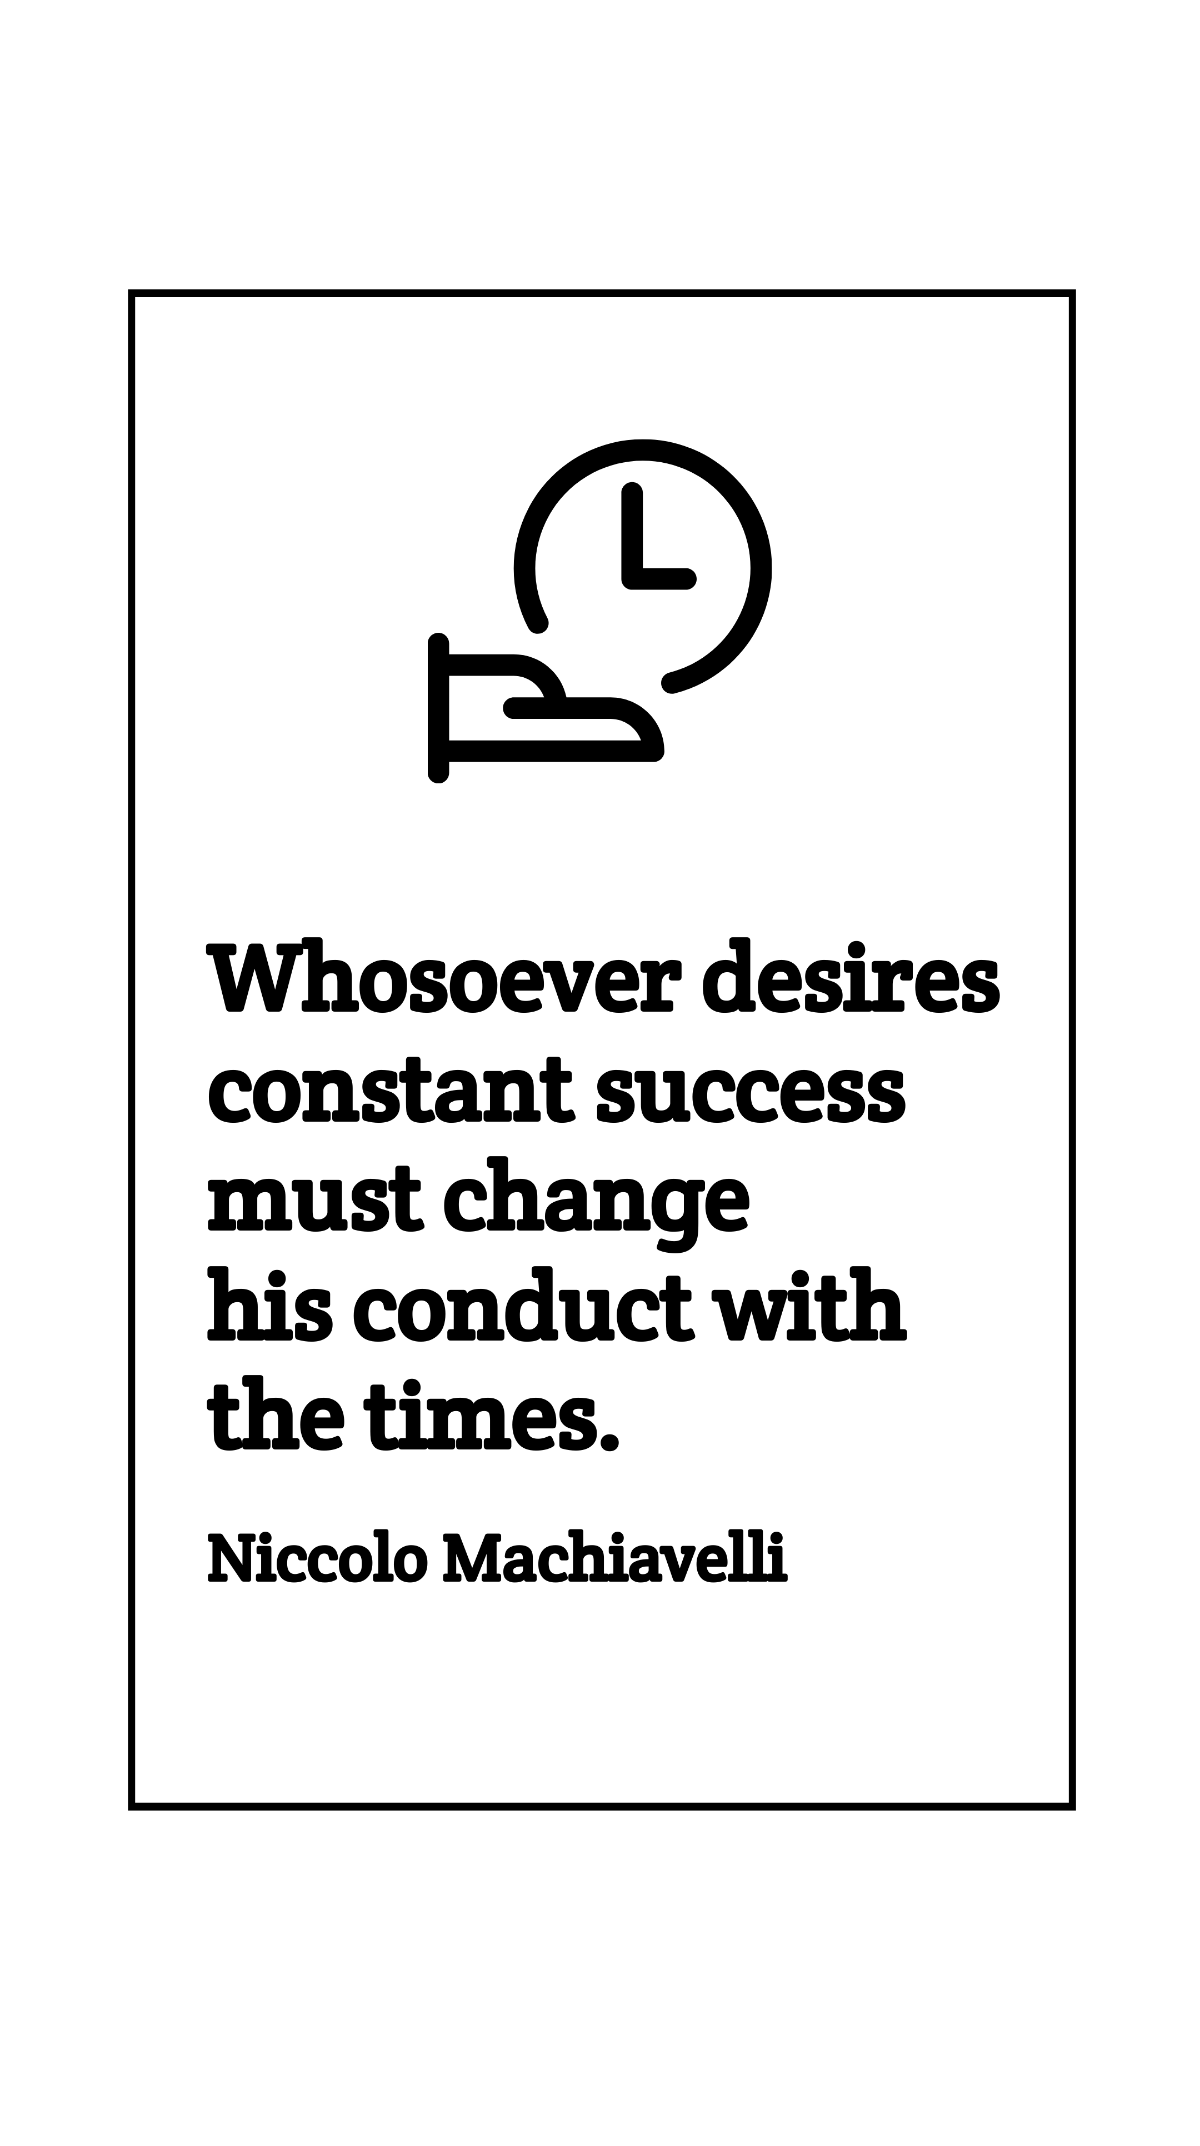 Niccolo Machiavelli - Whosoever desires constant success must change his conduct with the times.